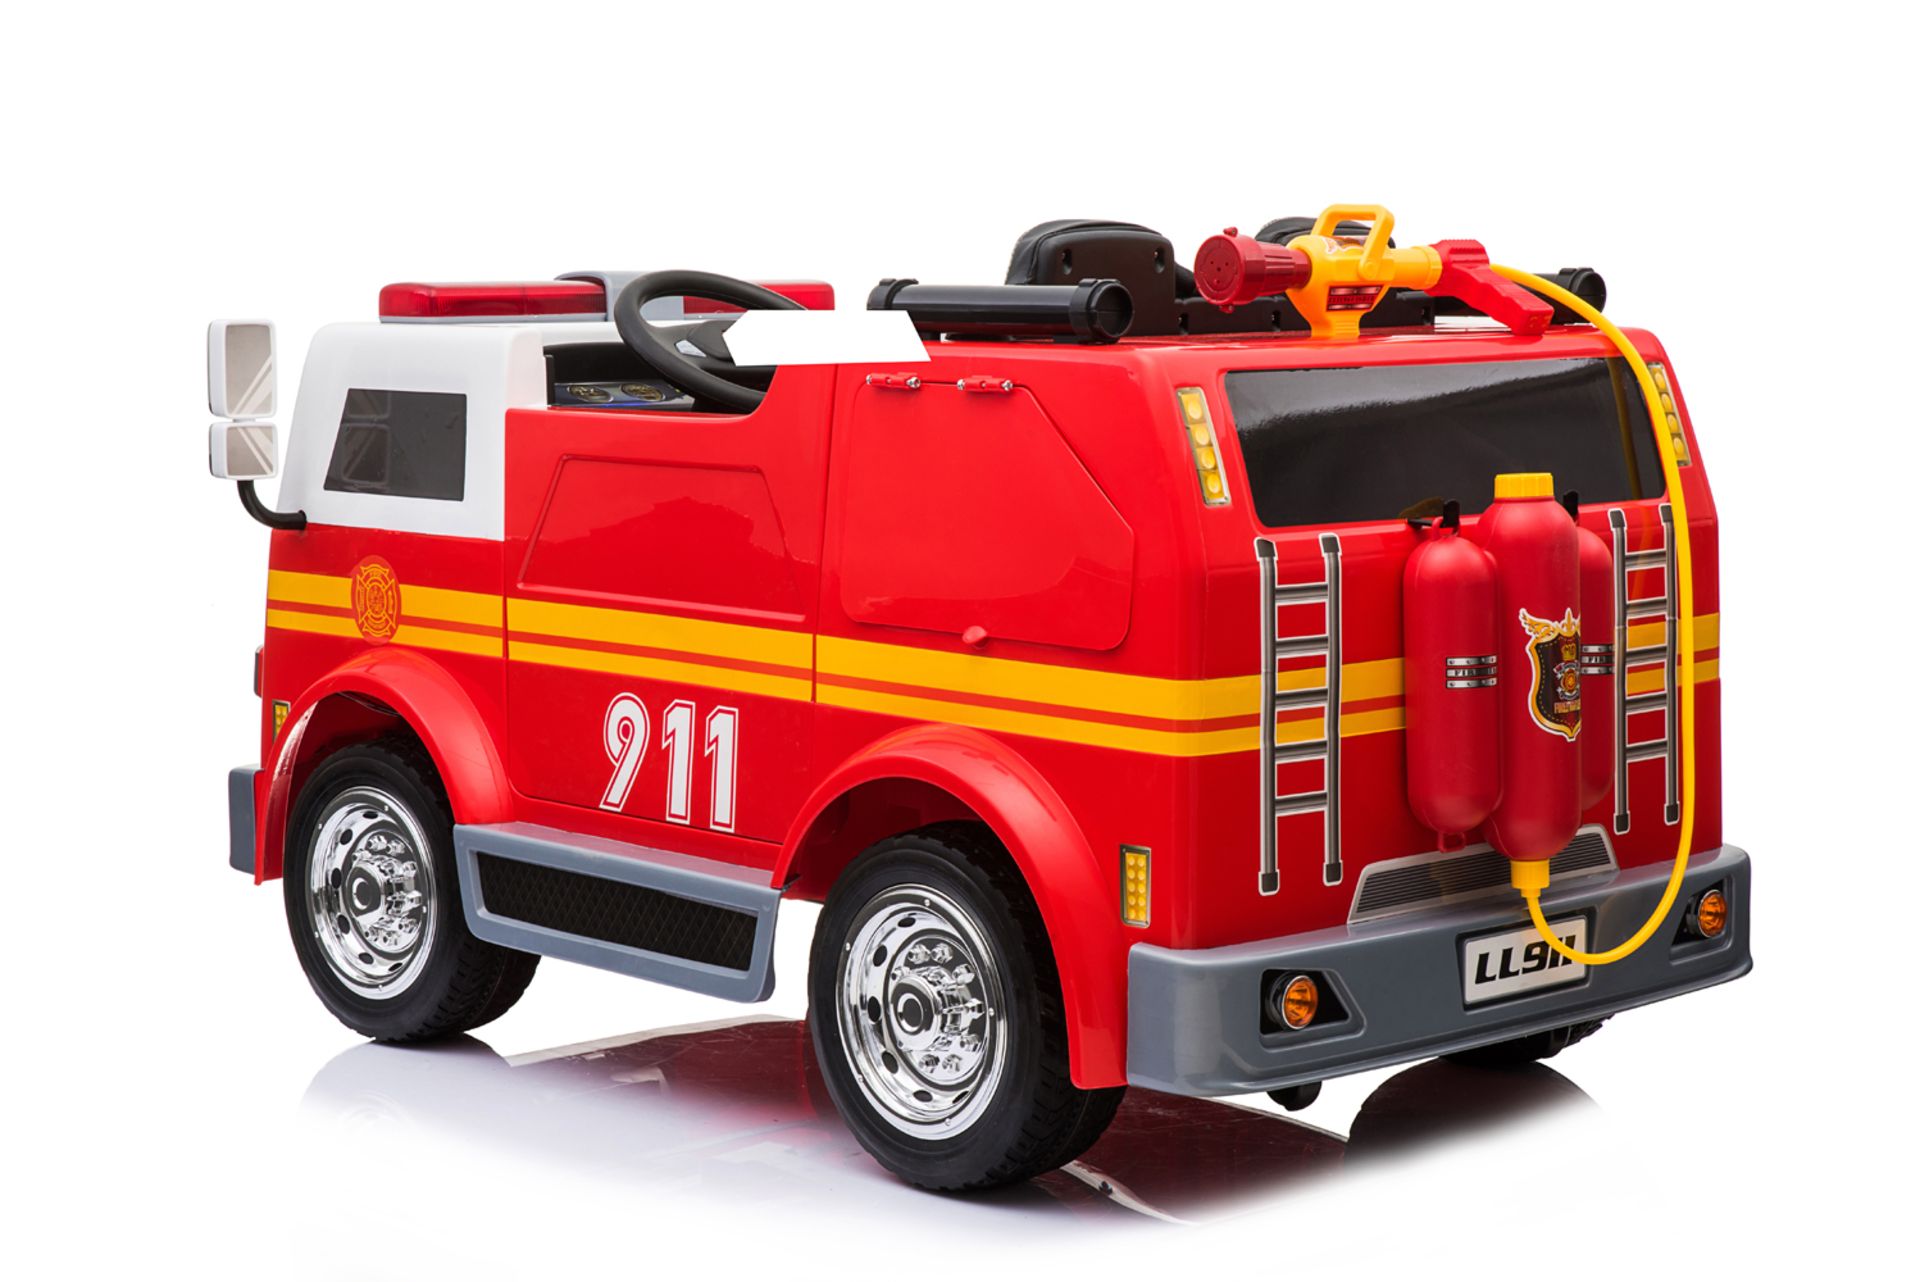 Ride On Fire Truck 911 12v EVA Wheels Twin Leather Seats and Parental Remote Control - Image 3 of 21